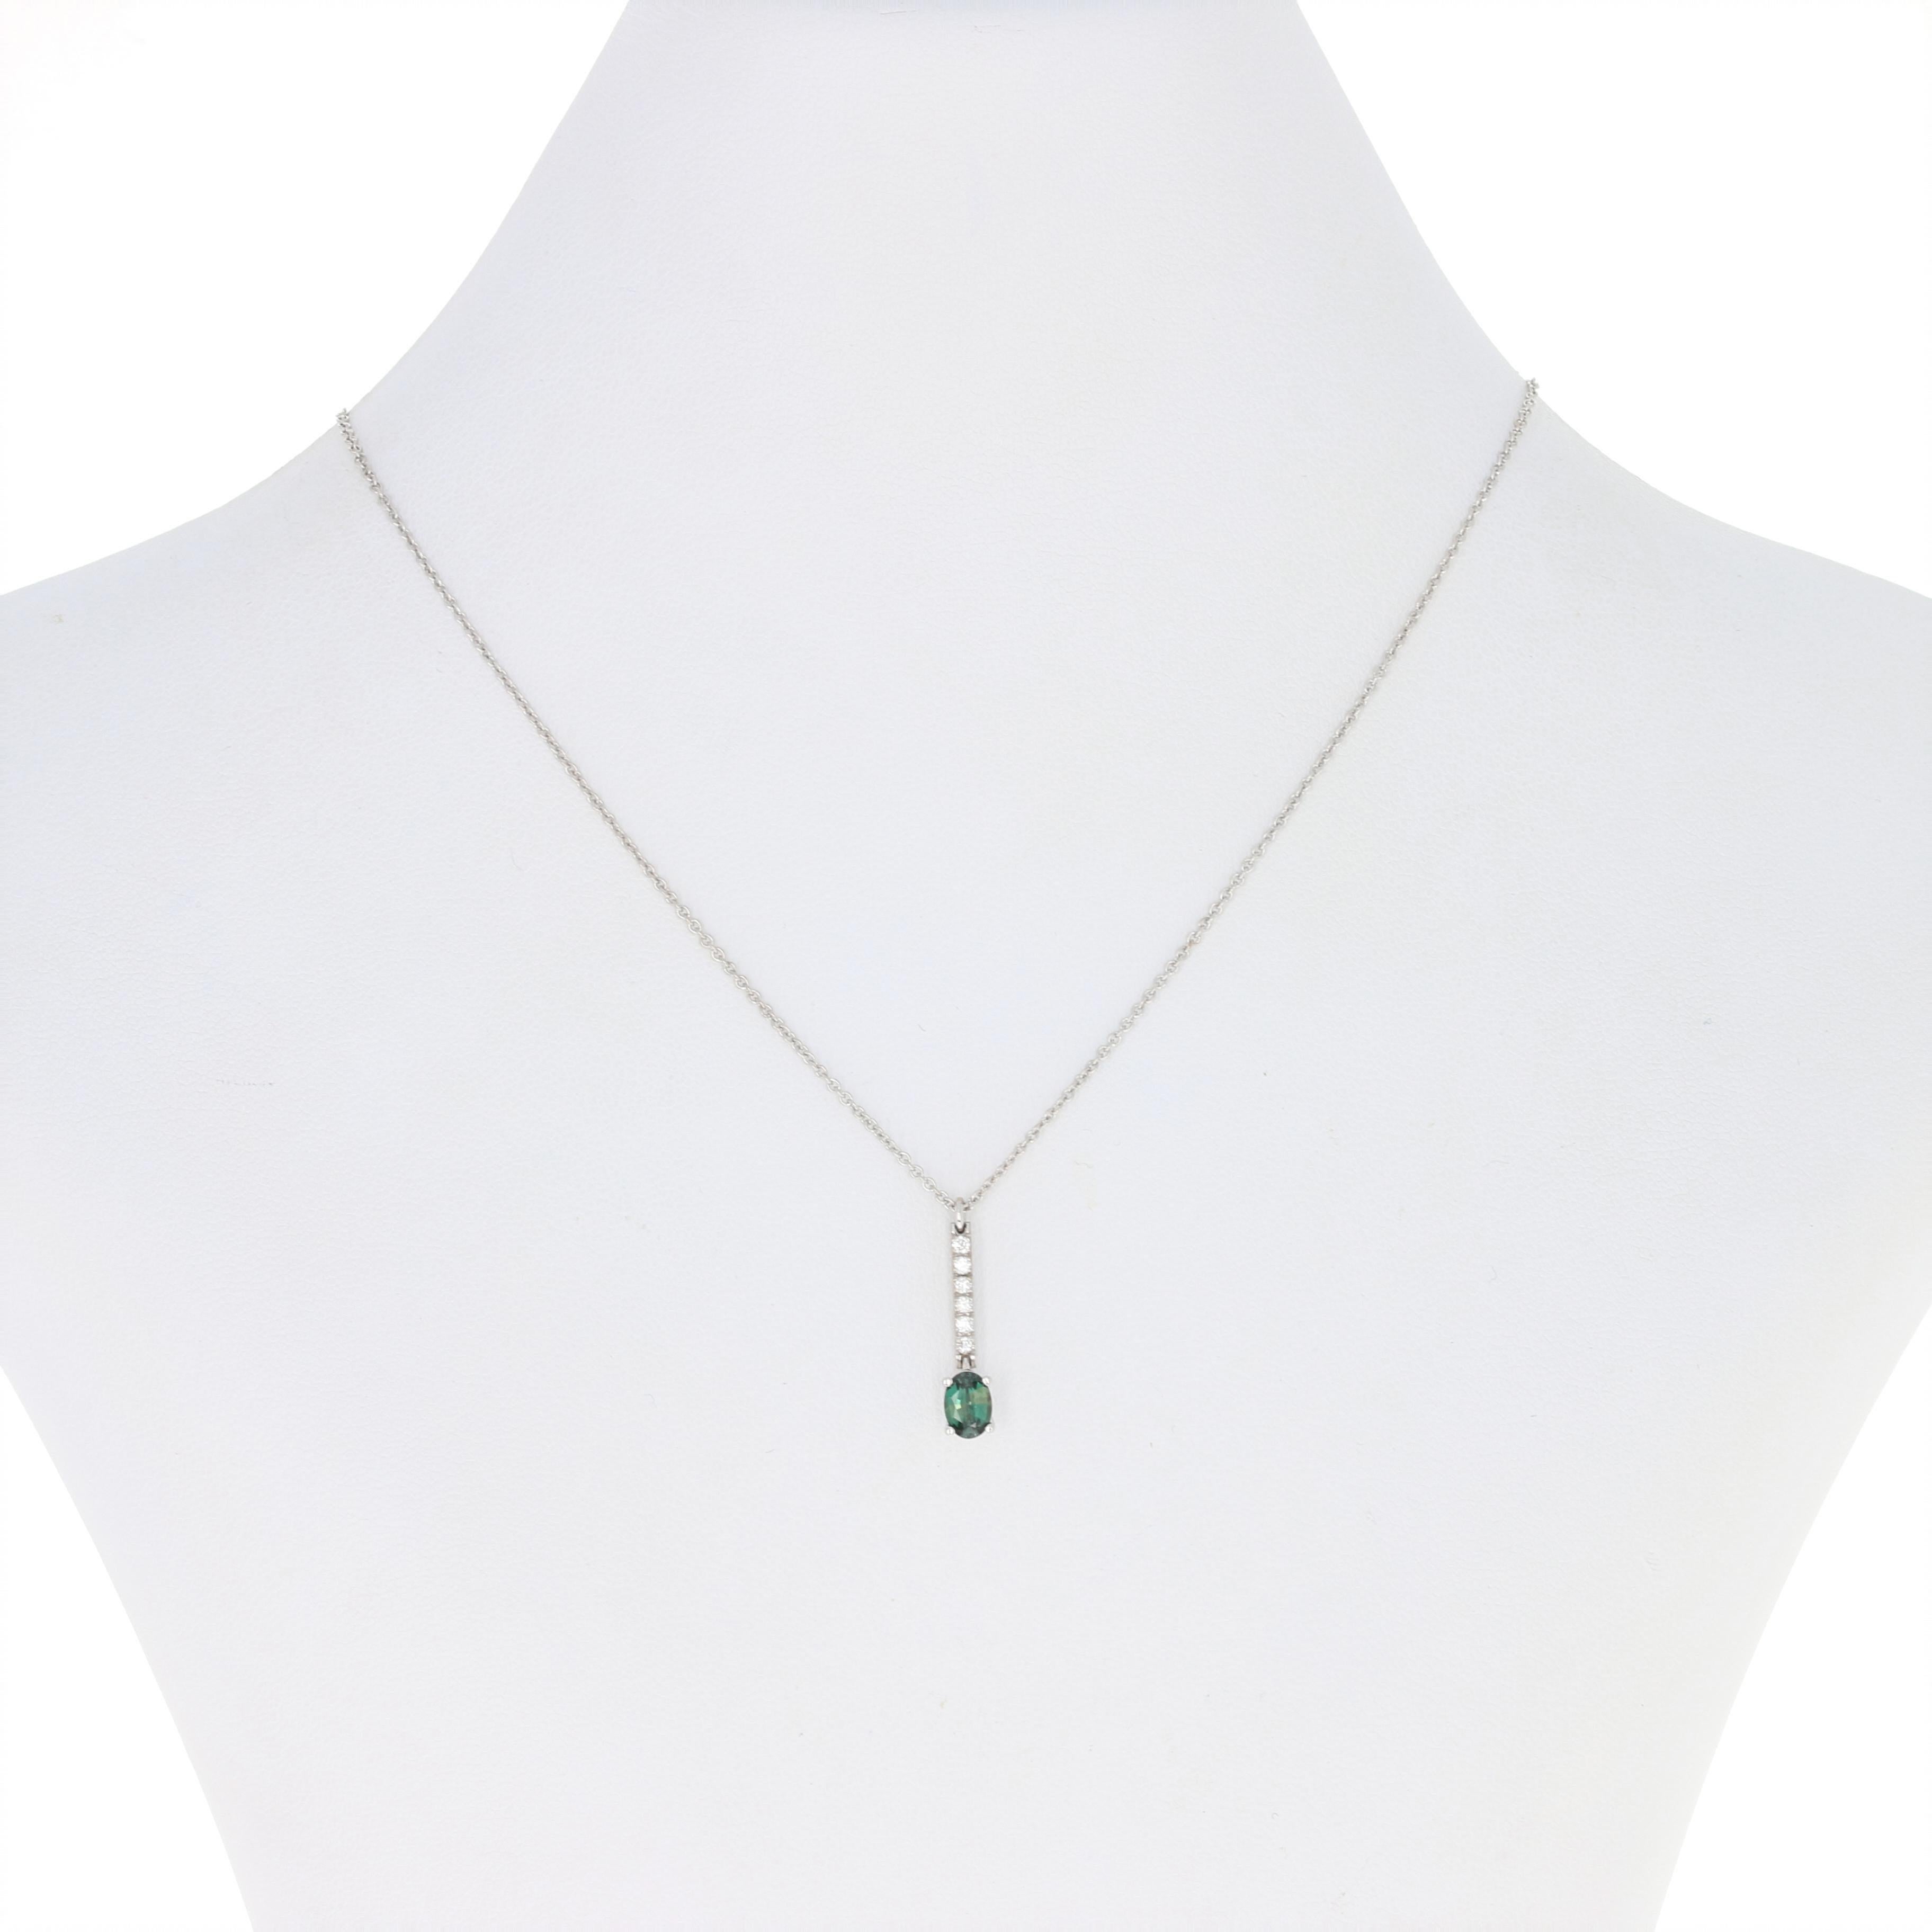 This necklace’s sparkling mystique will light up any special occasion! Exquisitely crafted in 18k white gold, this modern drop pendant is graced by an enchanting Alexandrite solitaire and an array of glittering diamonds suspended on an 18k white